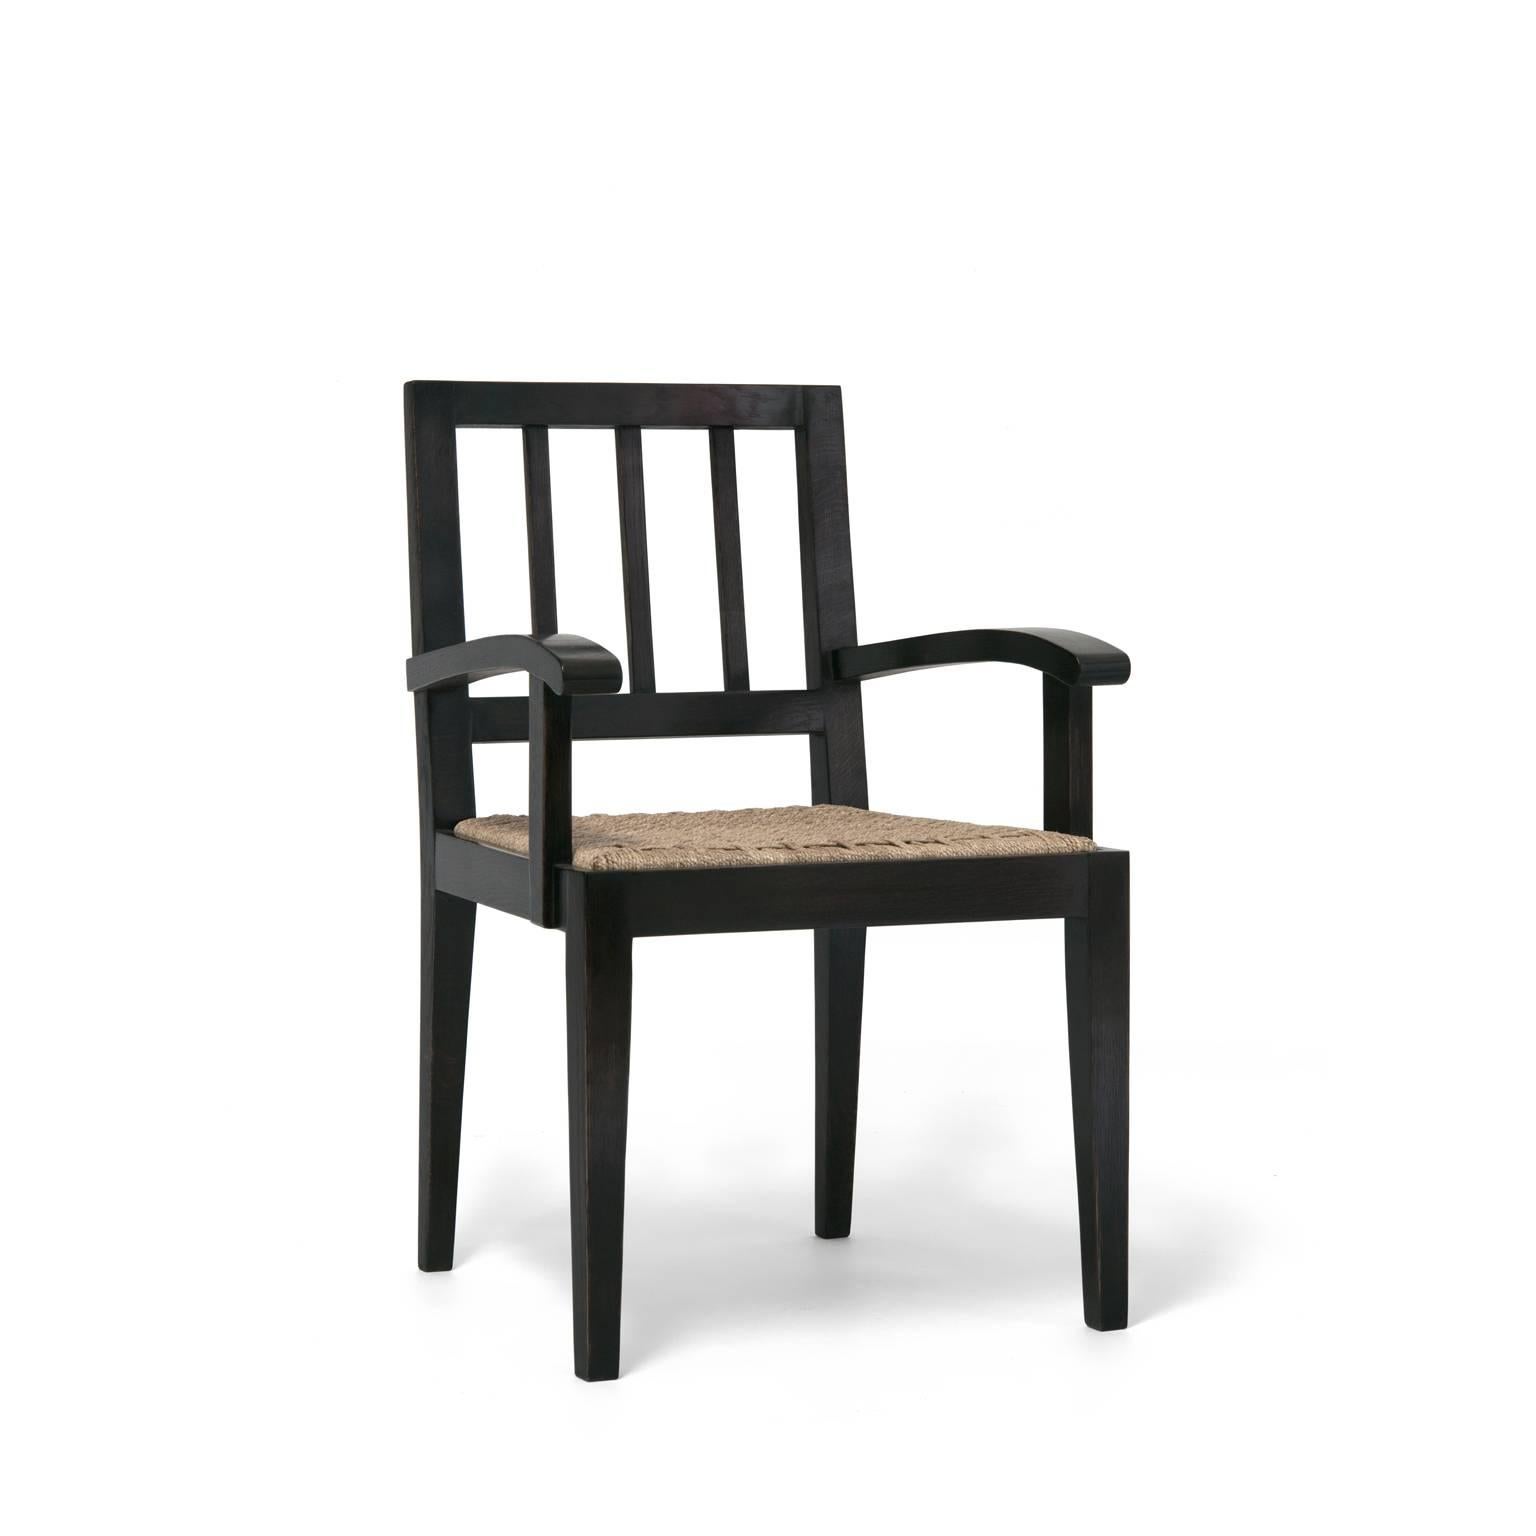 Atelier Demiurge Collection Mercer Armchair shown in oak with antique ebonized finish. Inquire for finish and customization options. As shown or COM 1 yard.

Atelier Demiurge Collection pieces are made to order, and custom sizes are available.